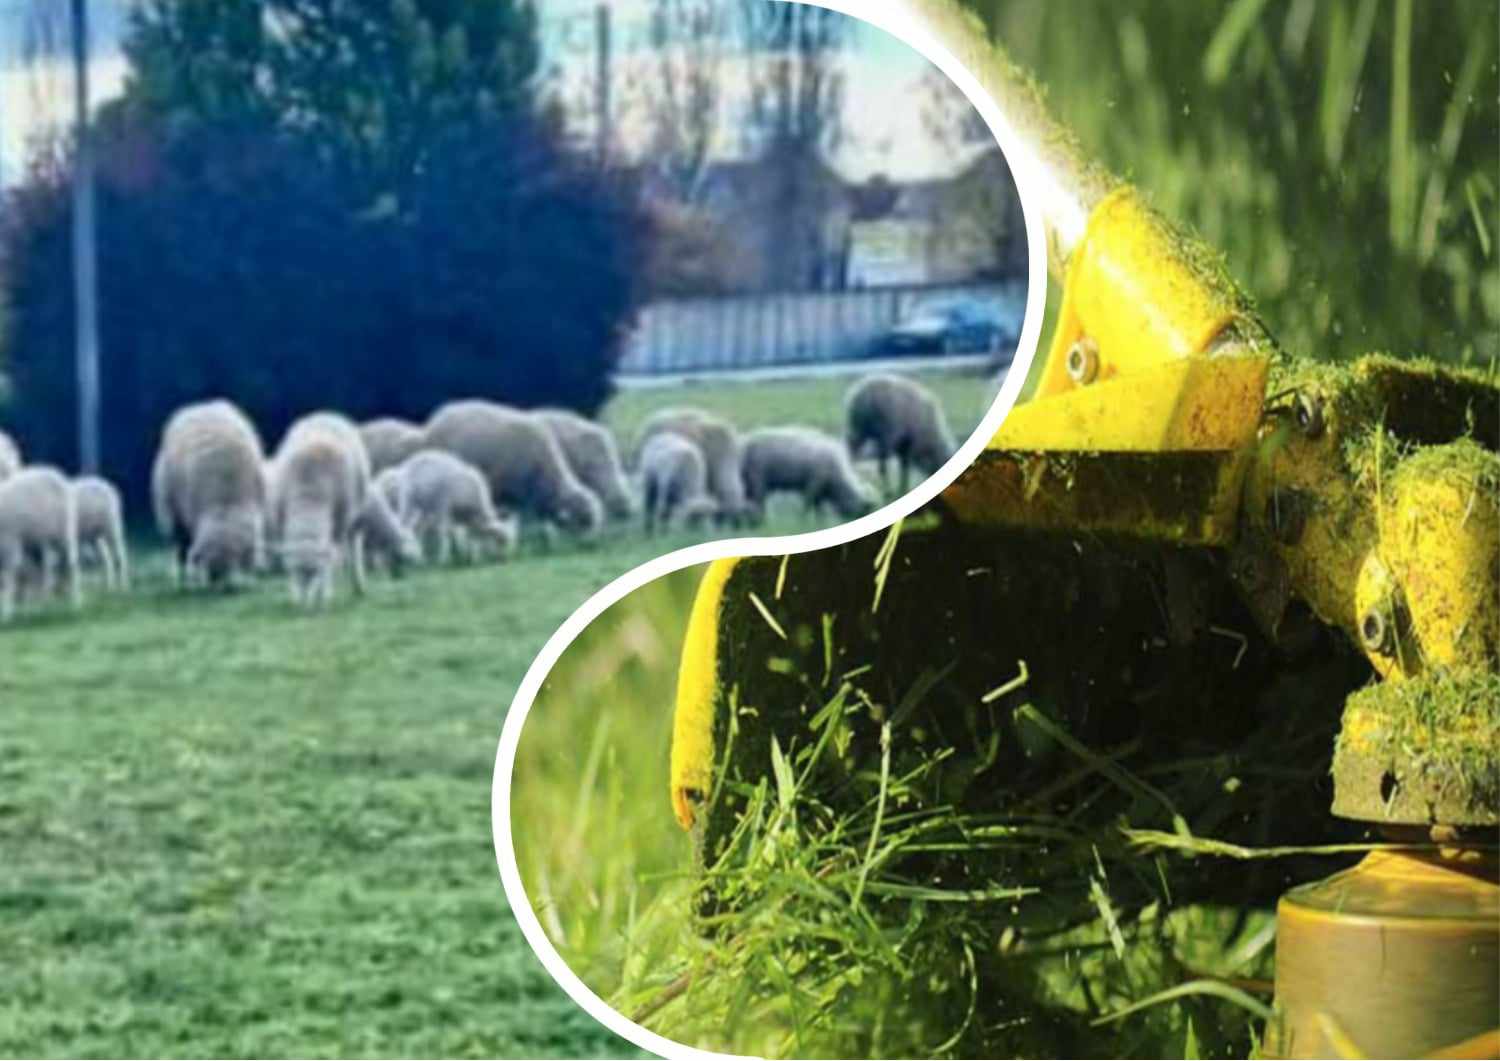 Facebook was amused by a flock of sheep grazing in the center of Uzhgorod.